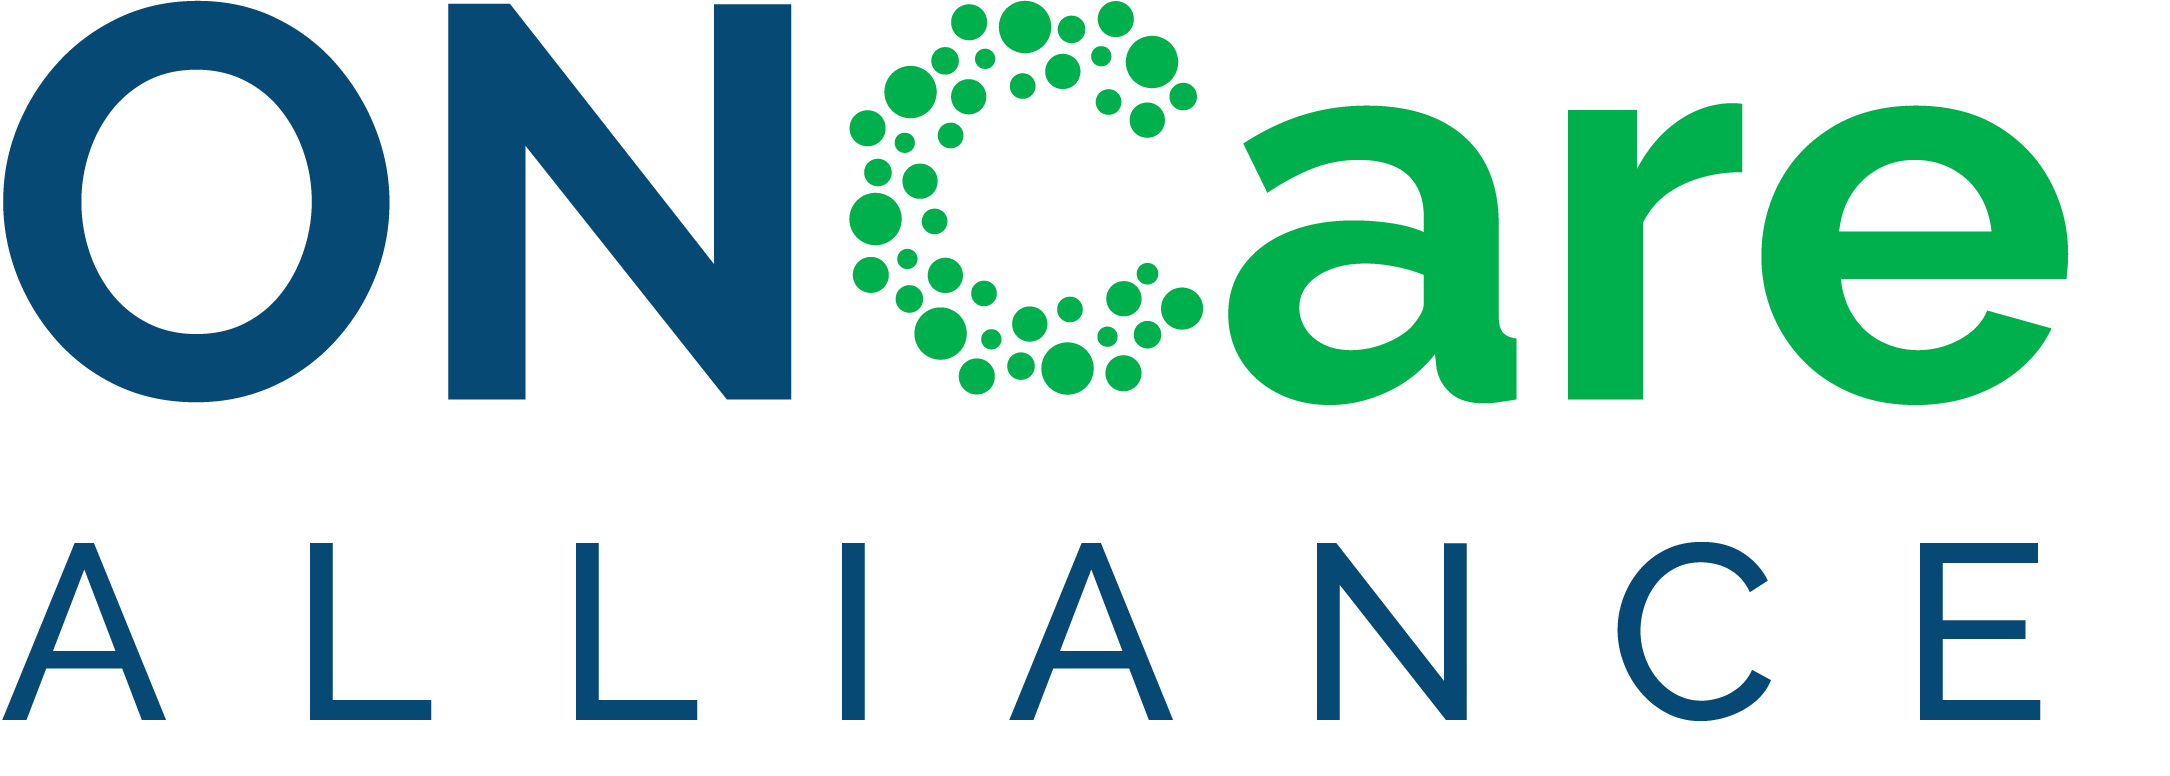 ONCare logo | Image credit: ONCare Alliance